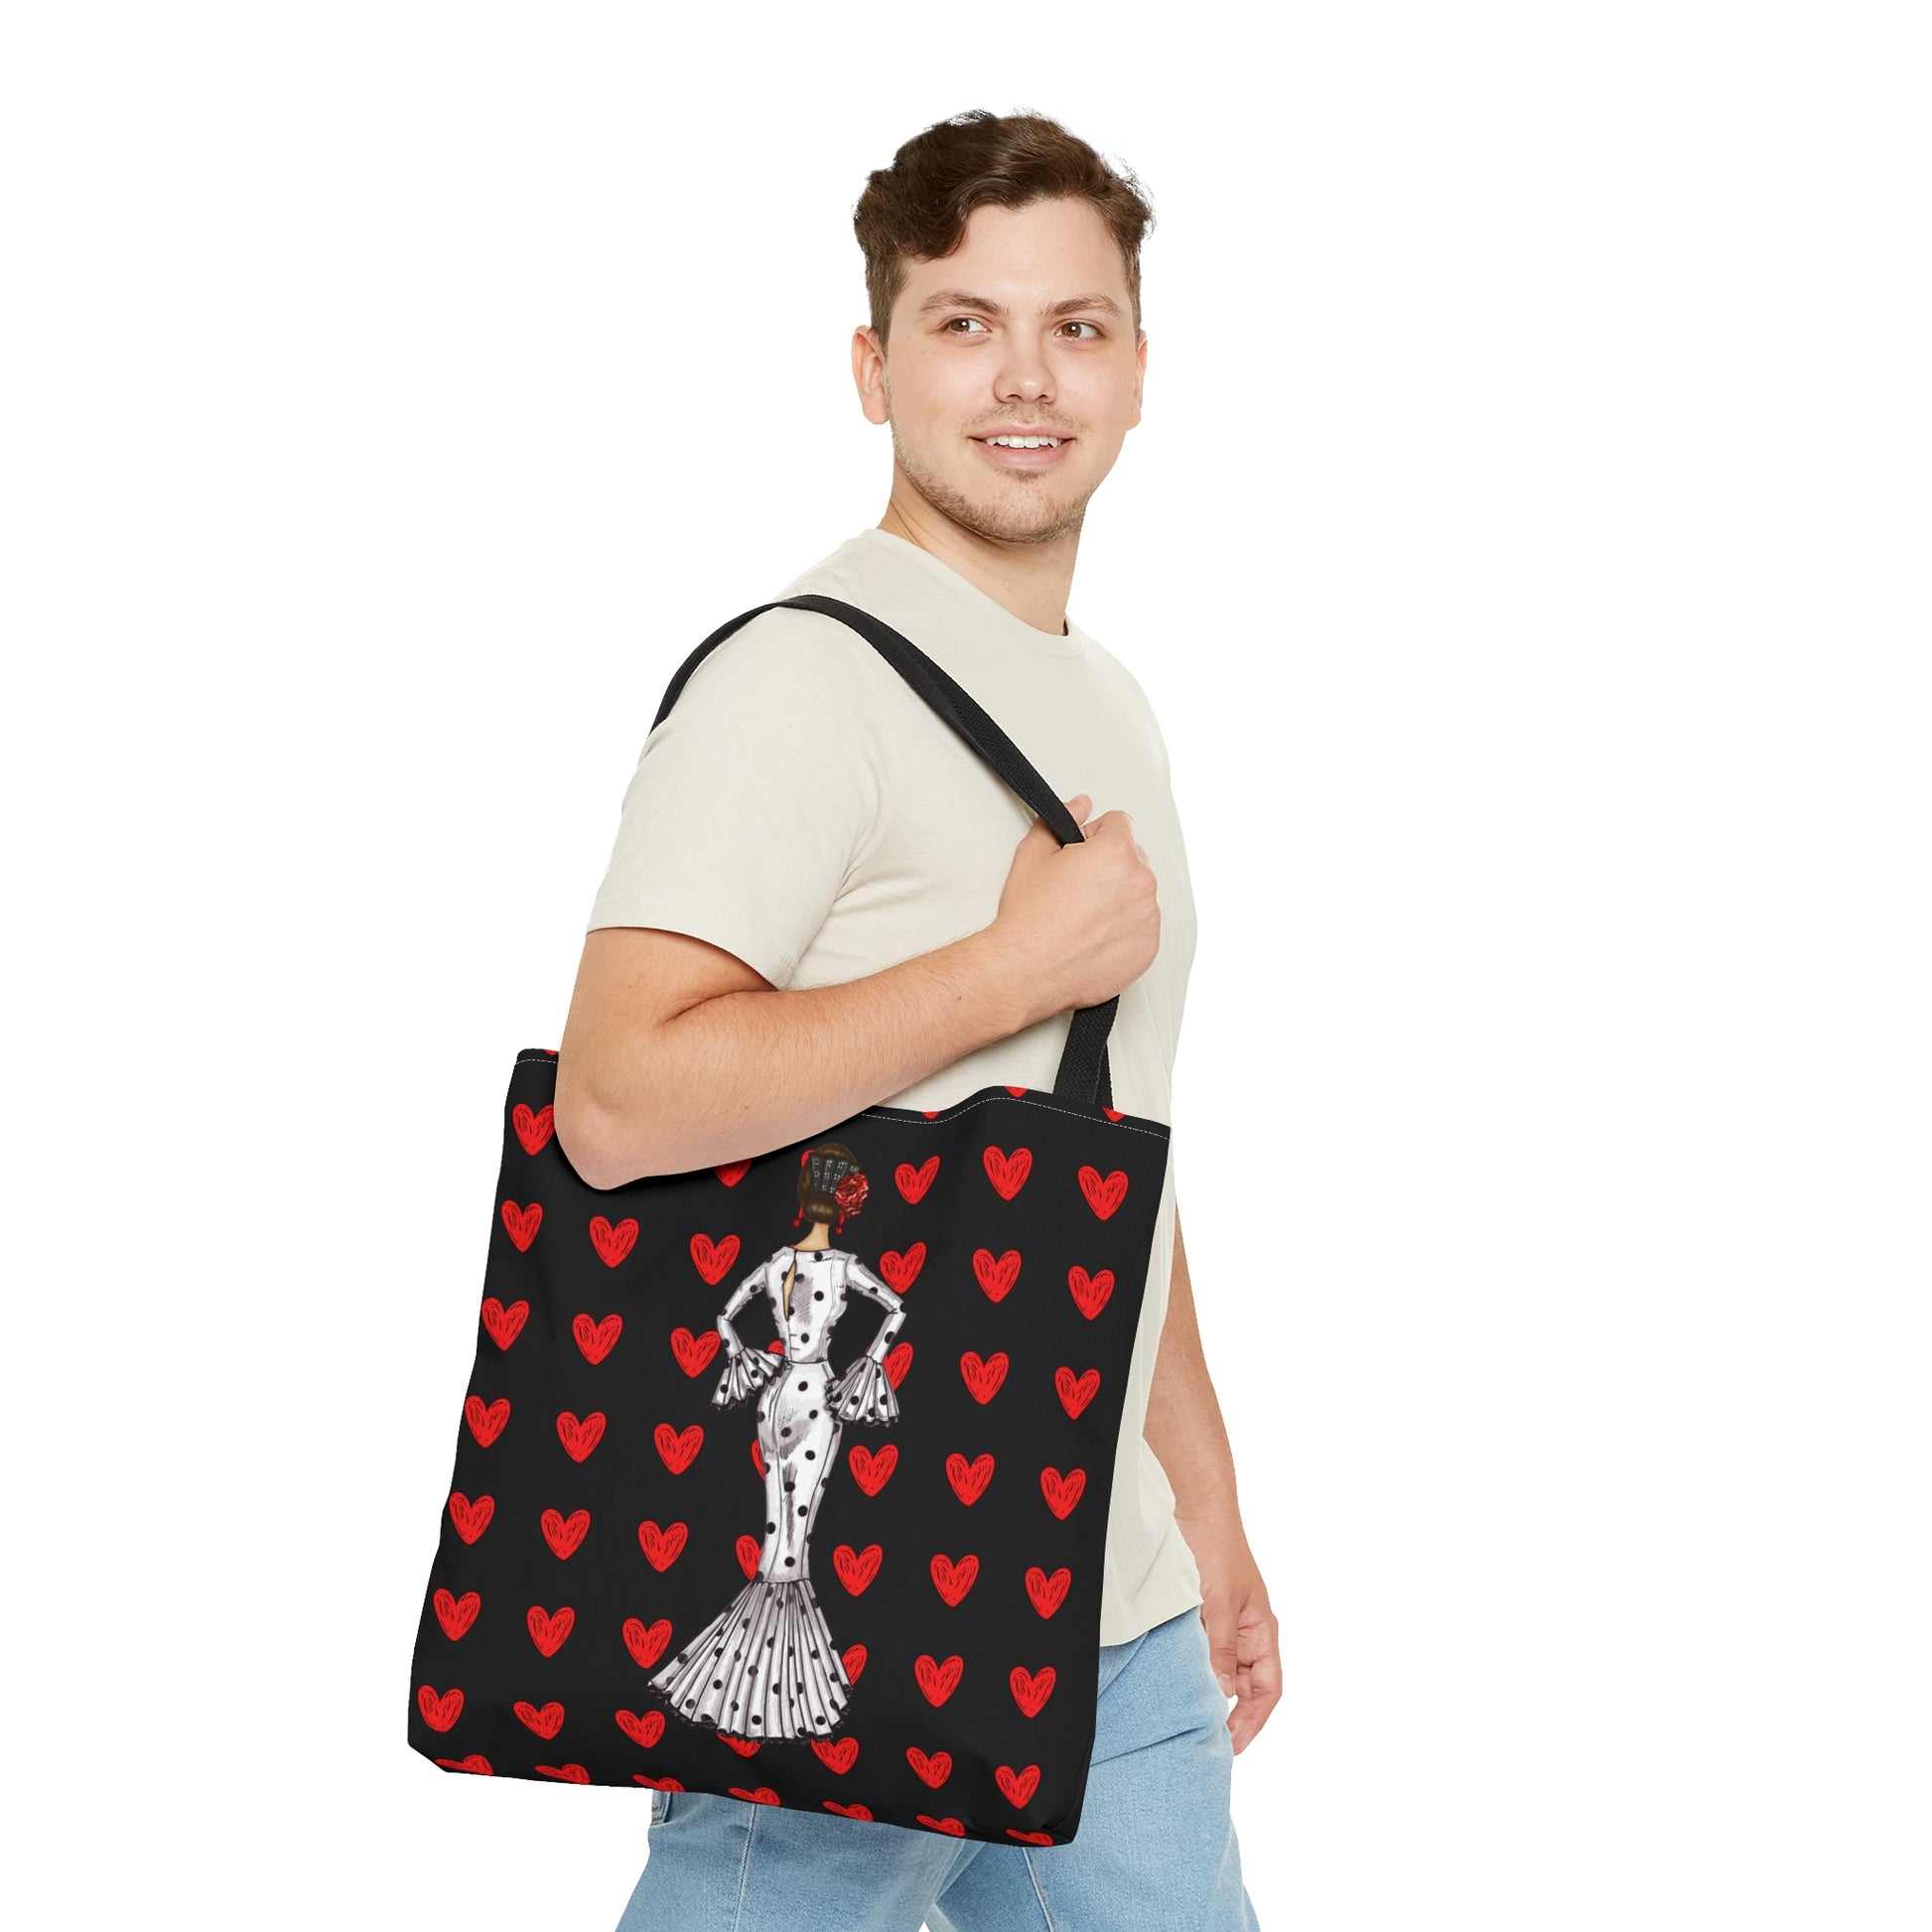 a man holding a black and red bag with hearts on it